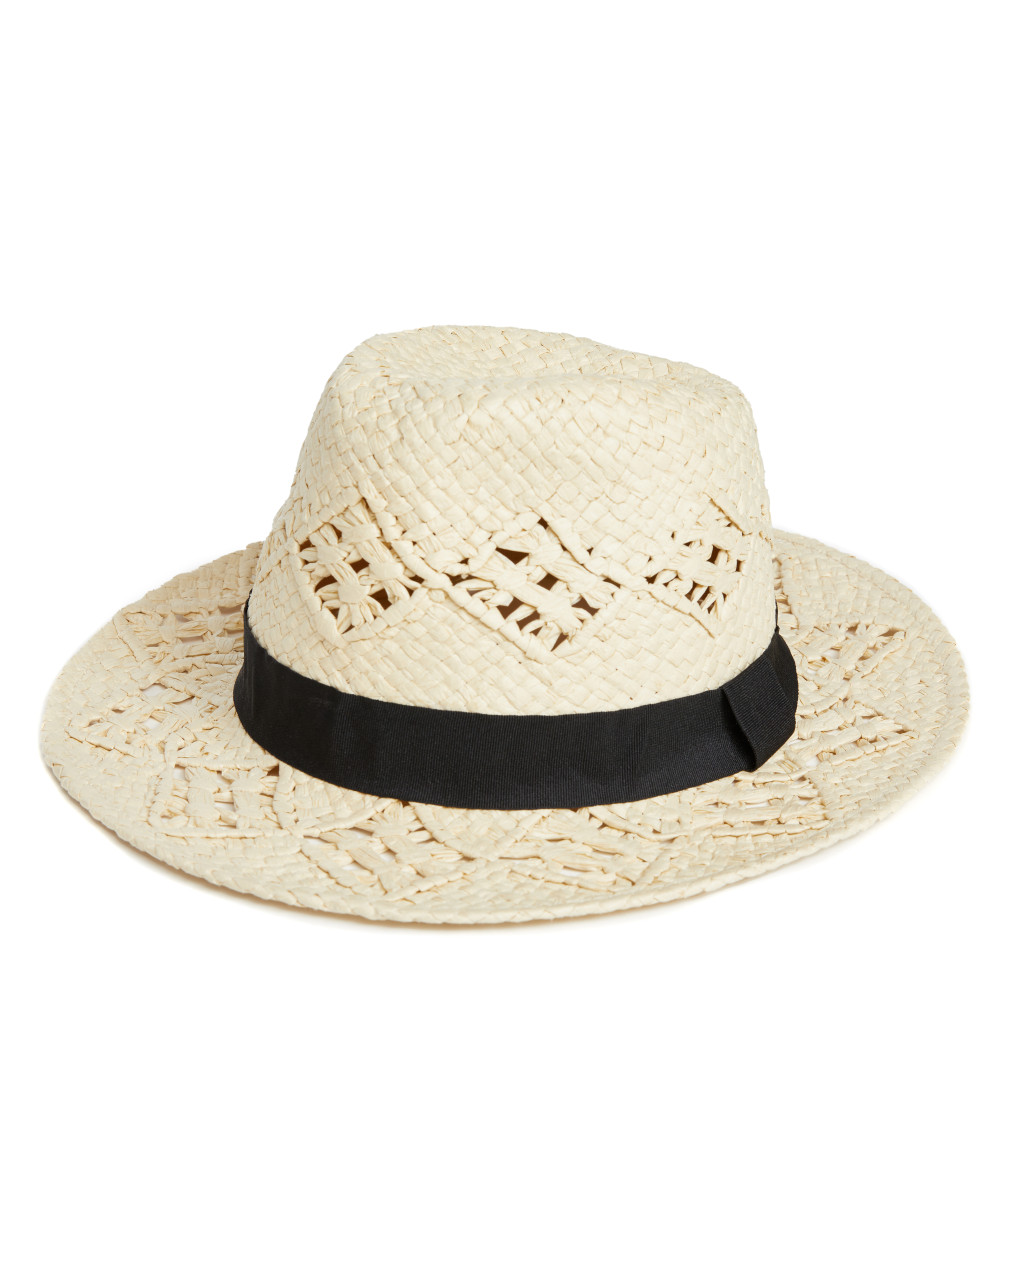 Straw Fedora with Open Weave Pattern